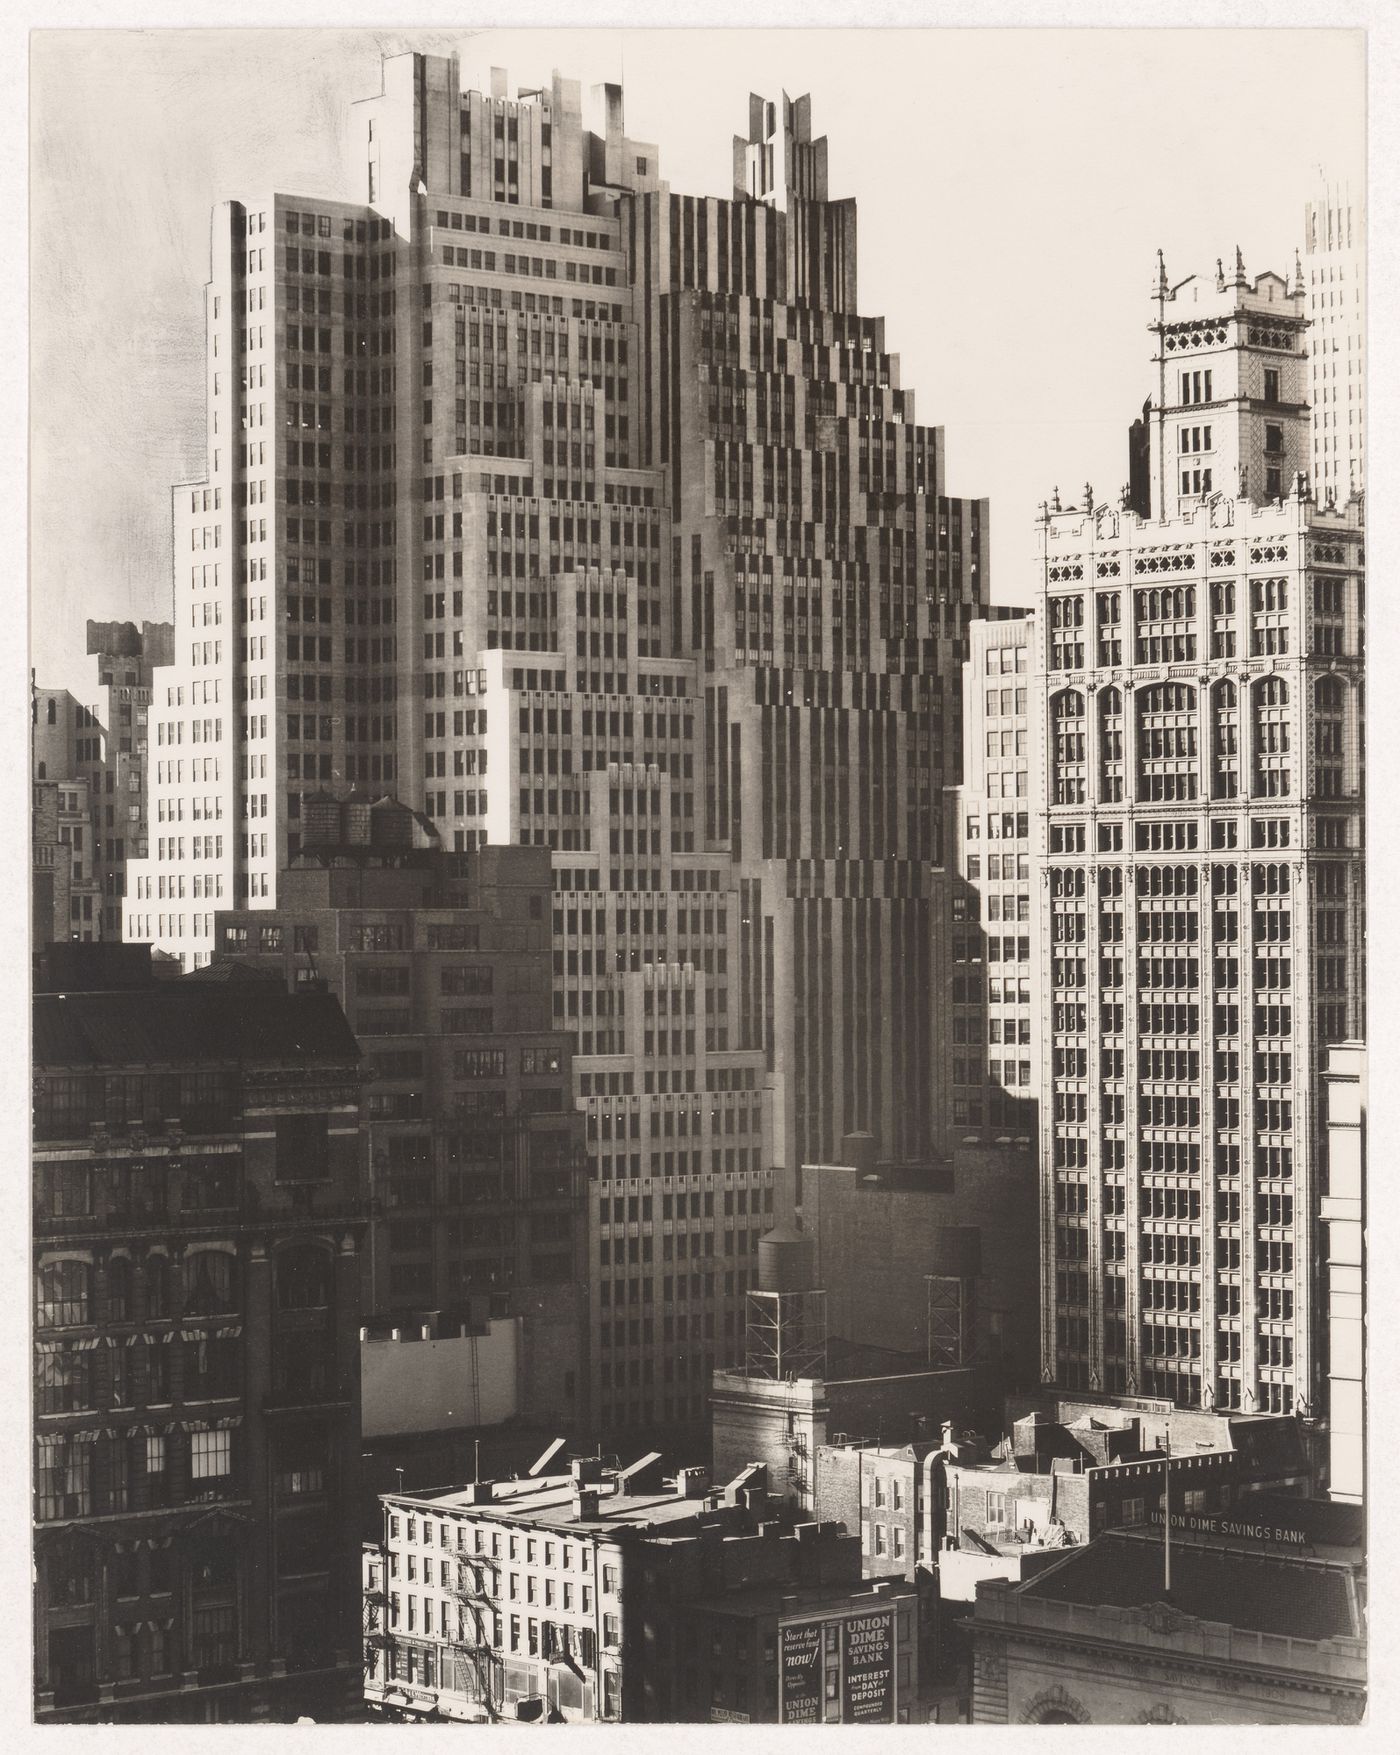 View of 40th St. between 6th and 7th Avenues, showing the Bryant Park Studio Building and the World Tower Building, New York City, New York